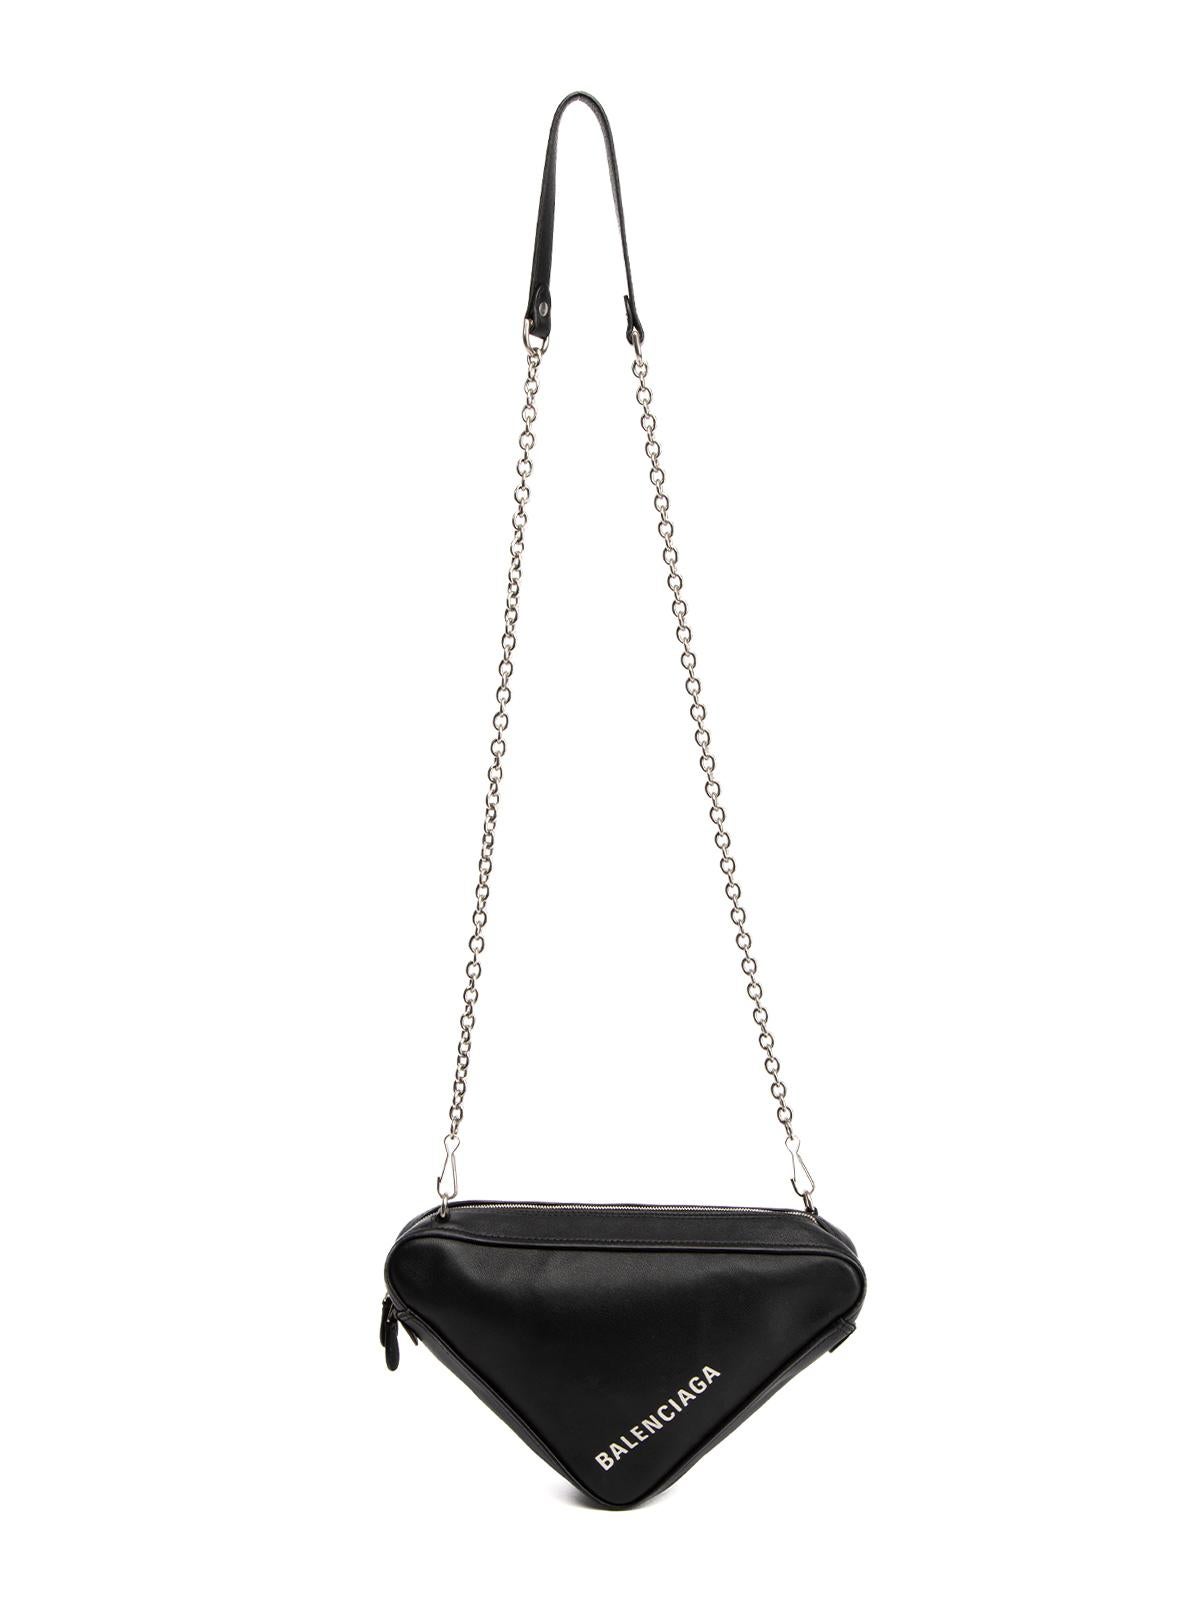 Balenciaga Women's Black Leather Triangle Crossbody Bag In Excellent Condition In London, GB